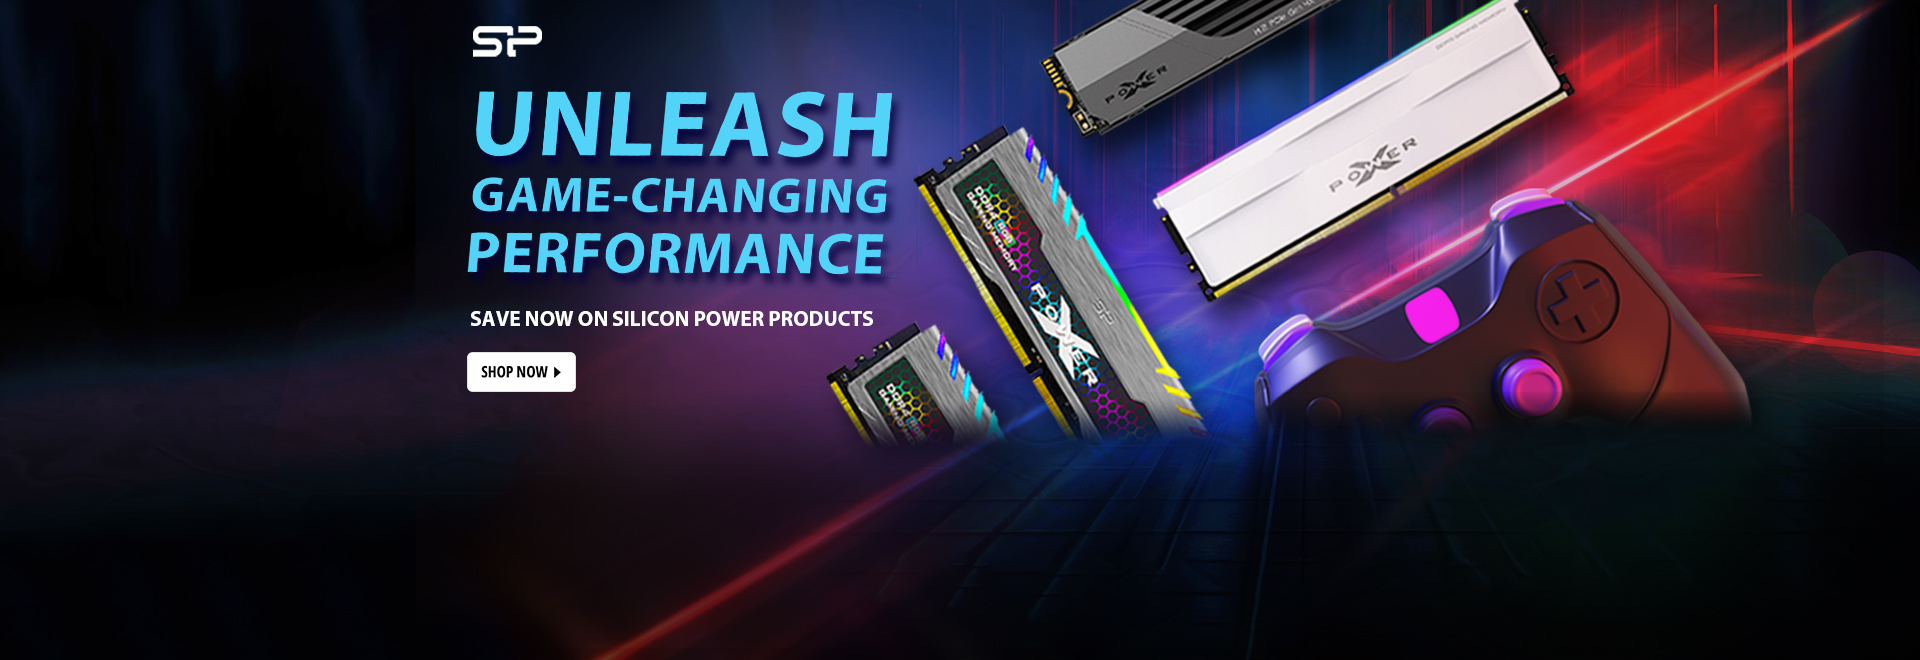 UNLEASH GAME-CHANGING PERFORMANCE